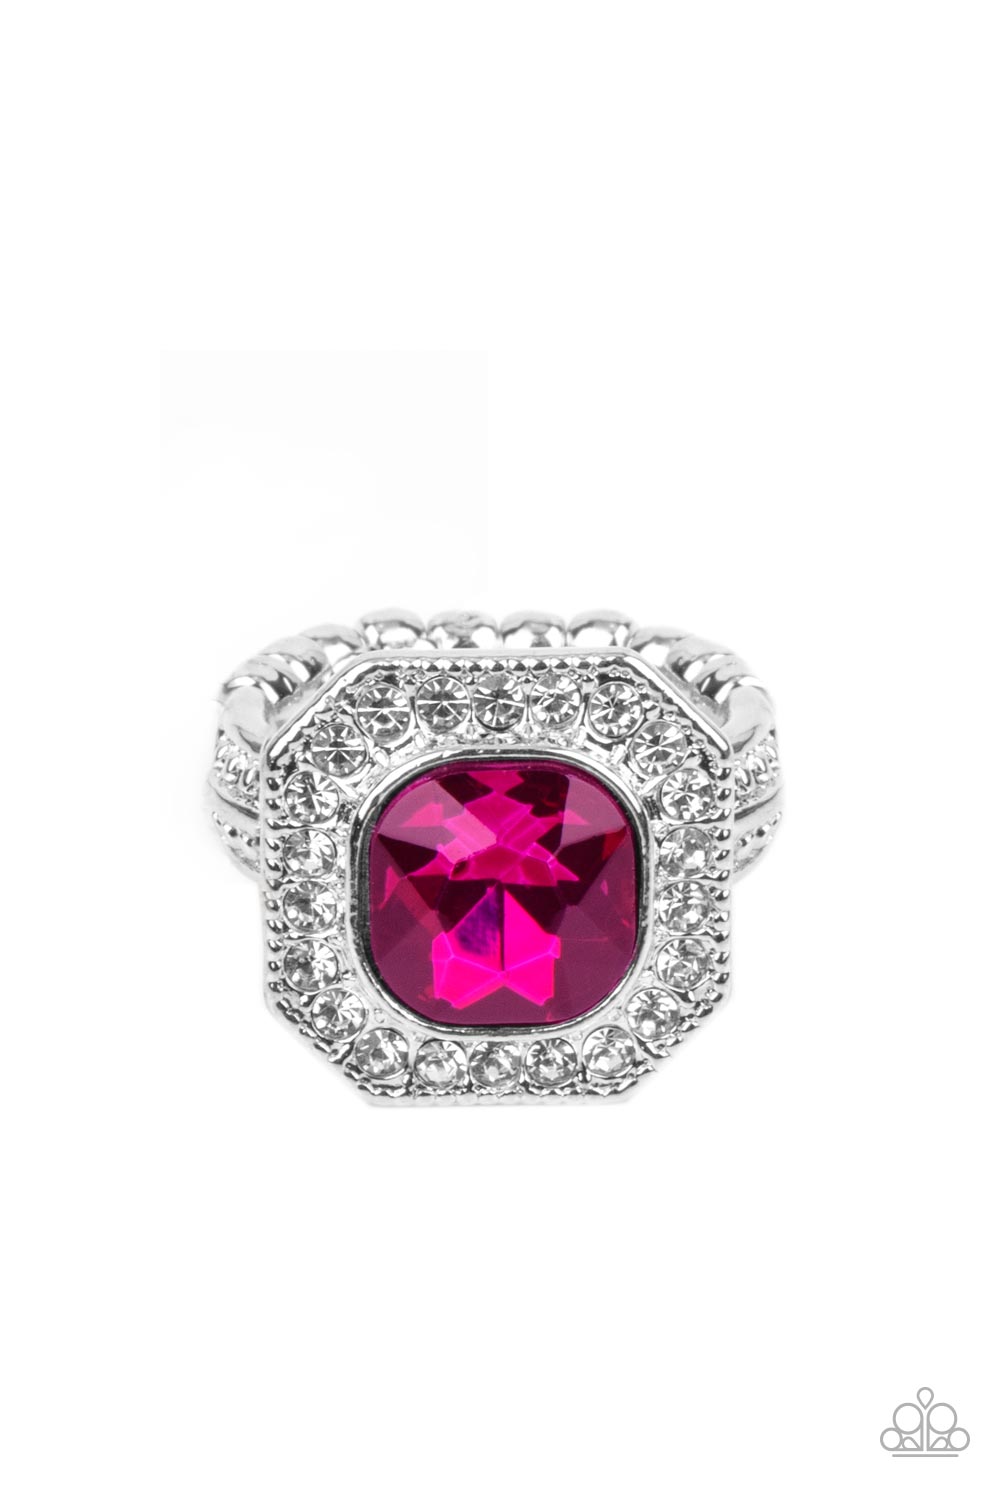 Title Match - Pink Gem and Silver Ring - Paparazzi Accessories - Bordered in a sparkly silver frame of glassy white rhinestones, an oversized pink gem adorns the finger for a timeless finish.